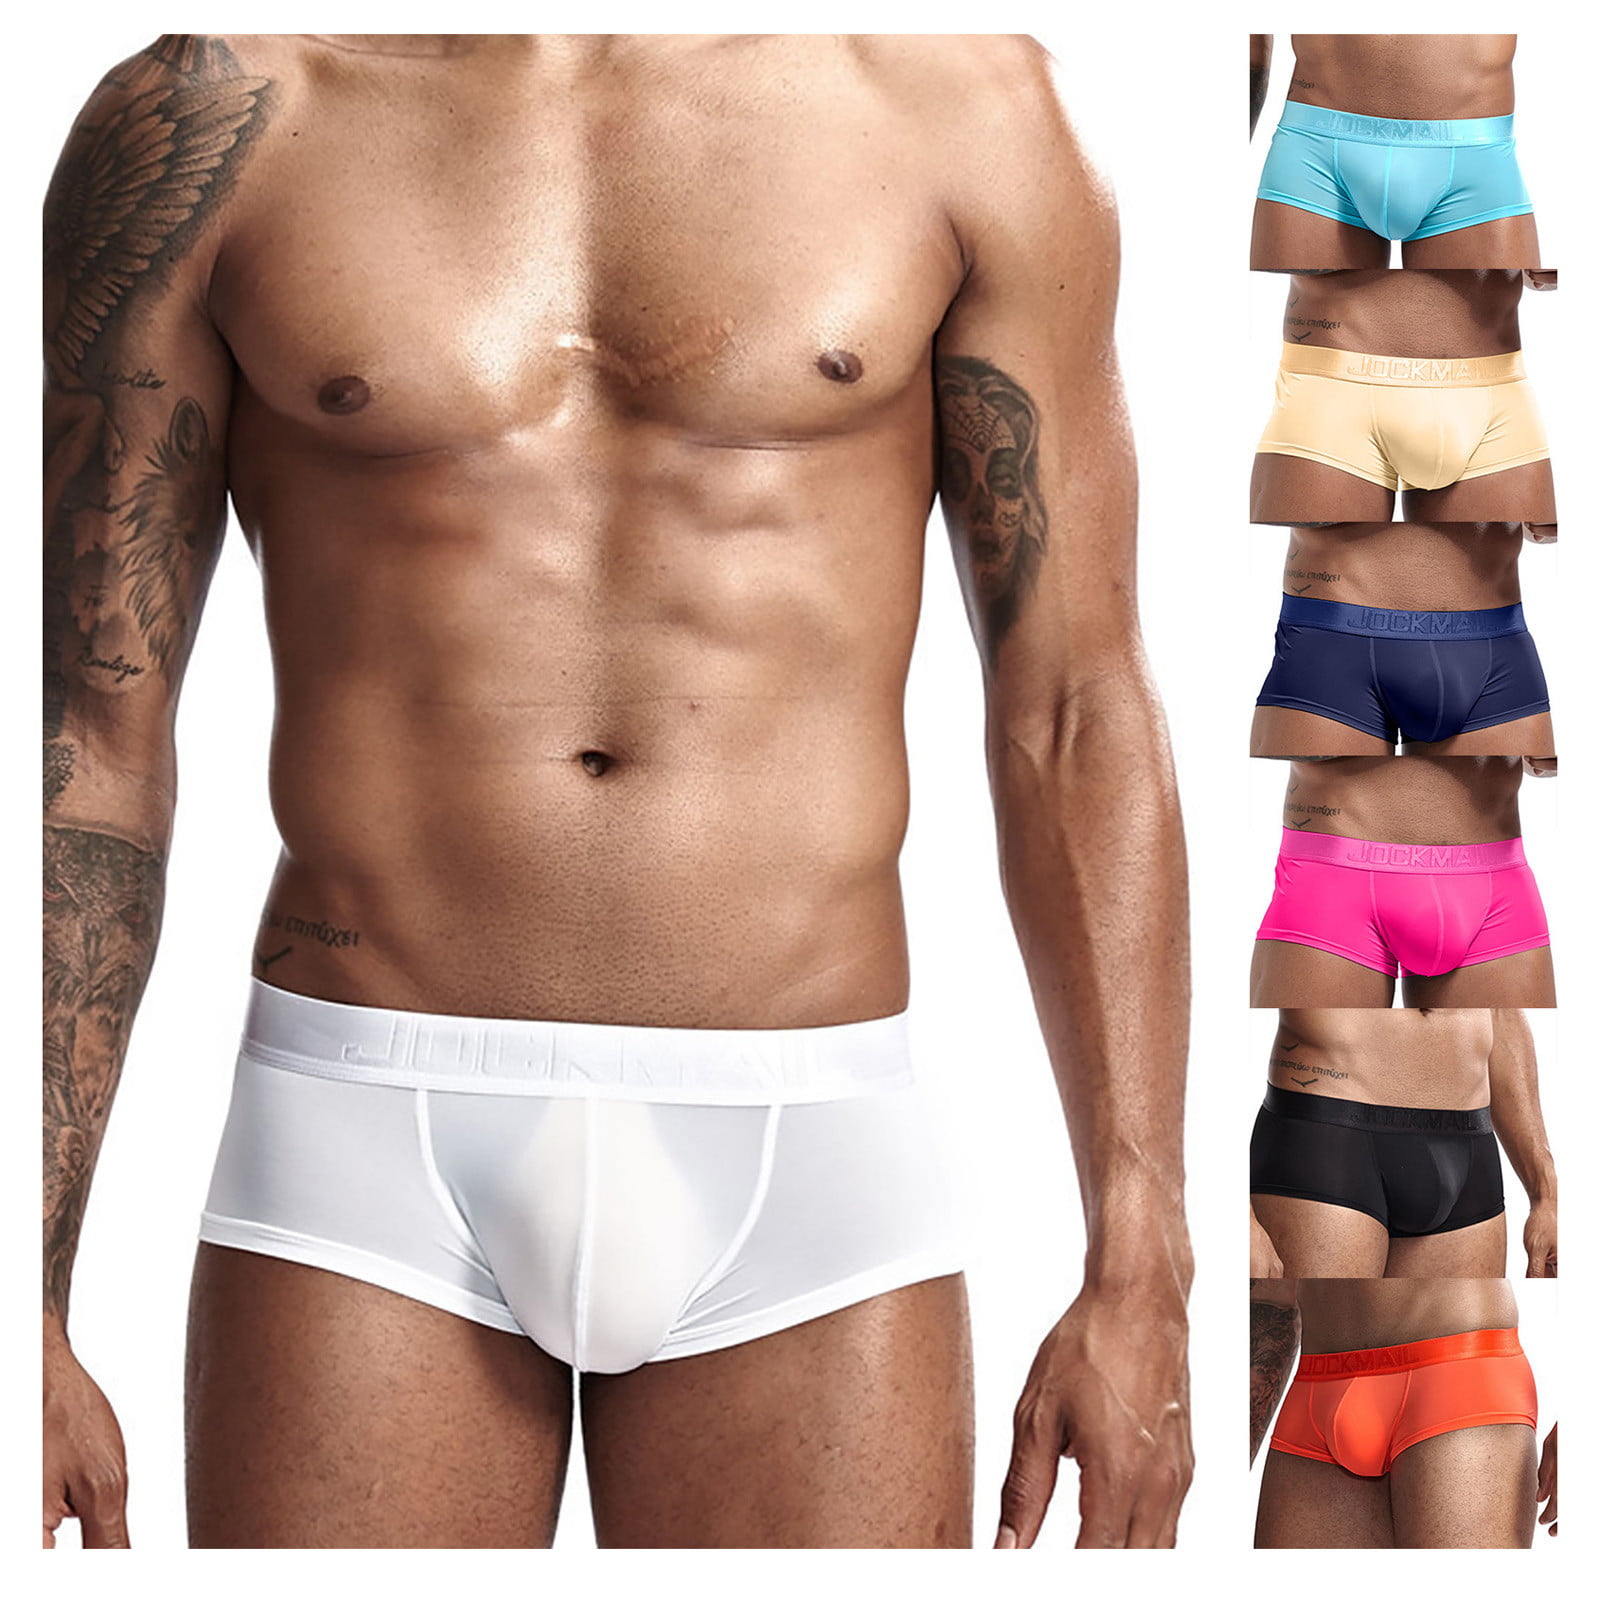 Mens Glossy Briefs Booty Shorts Hot Pants High Cut Thong Pouch